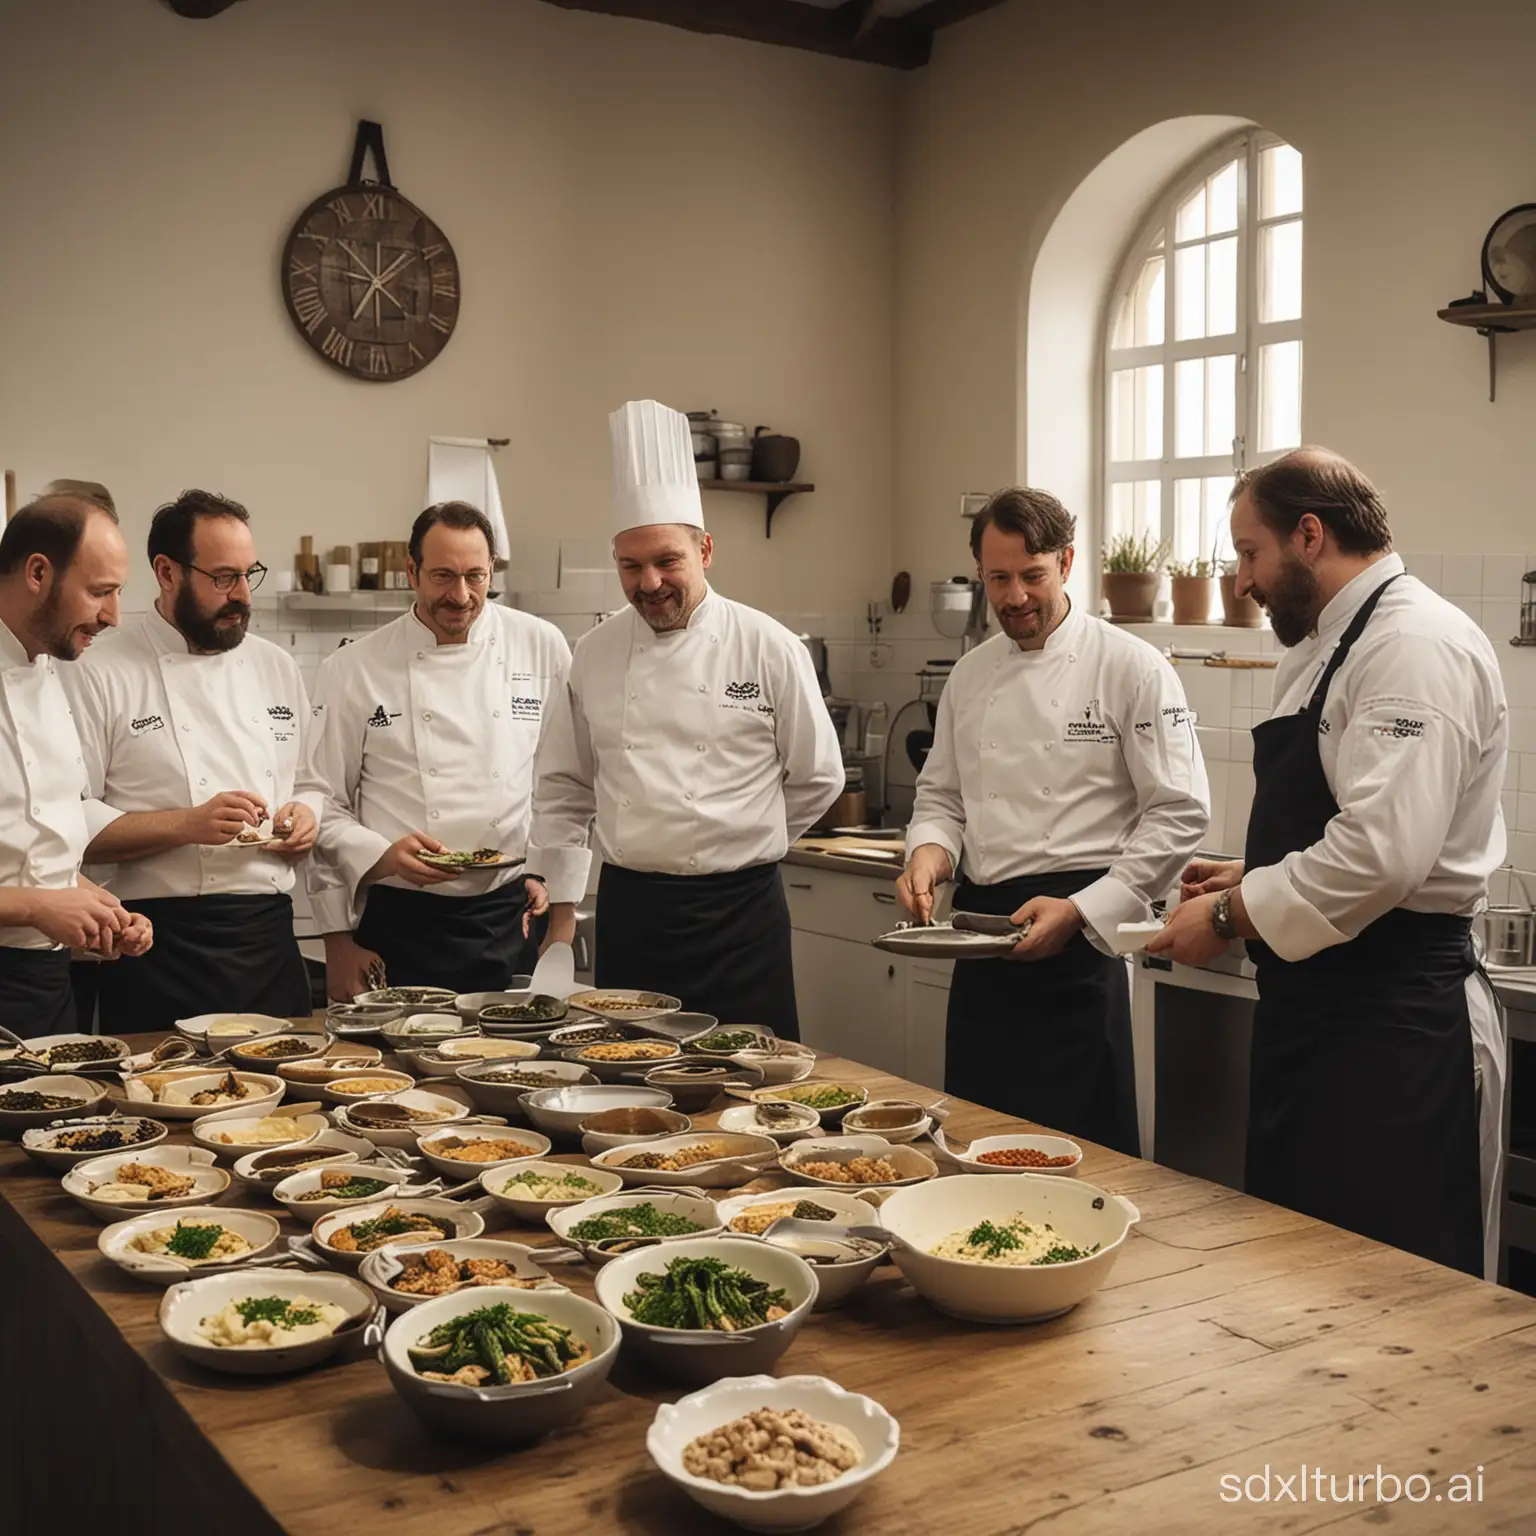 Culinary-Expert-Frank-Heppner-Teaching-Eel-Dishes-at-Bauknecht-Kitchens-Cooking-Class